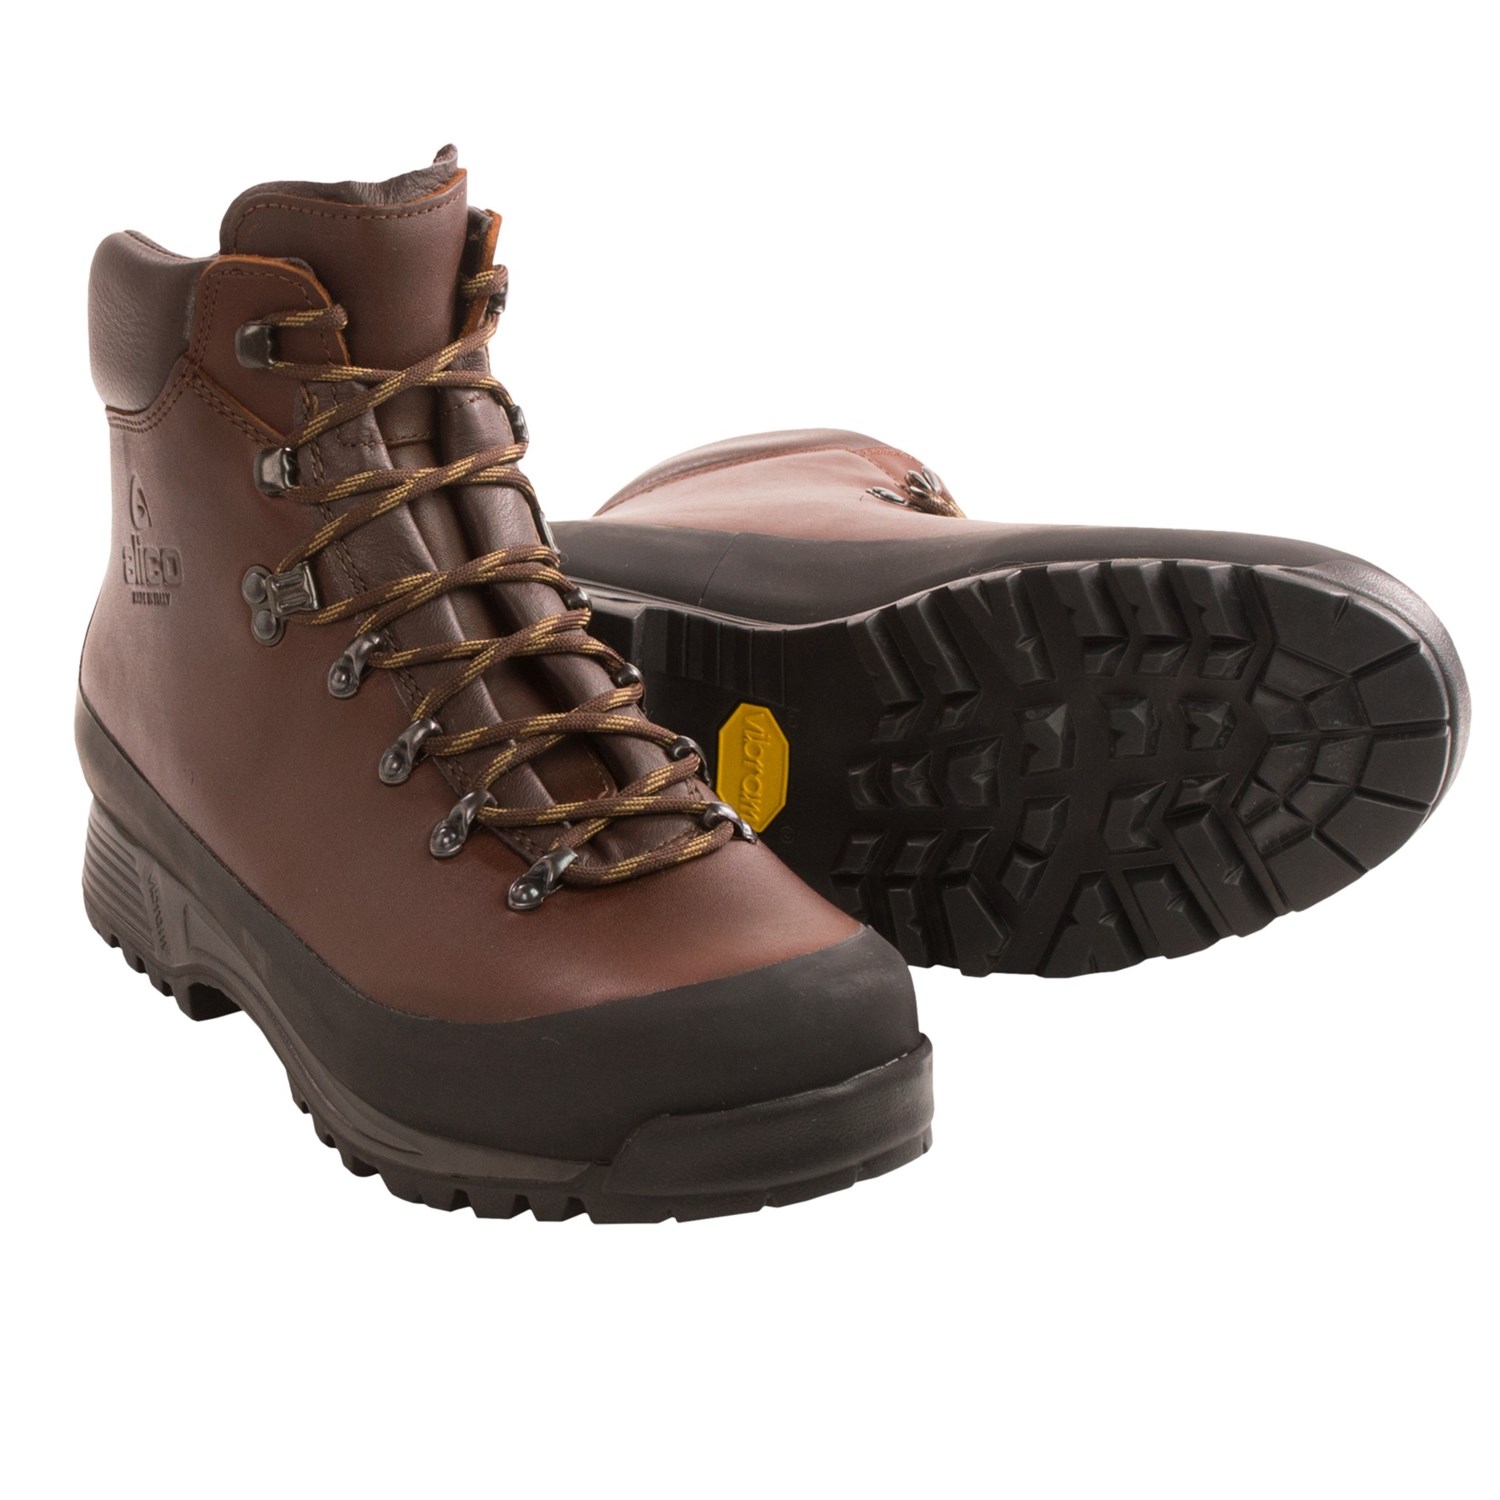 Alico Ultra Hiking Boots – Waterproof (For Men)